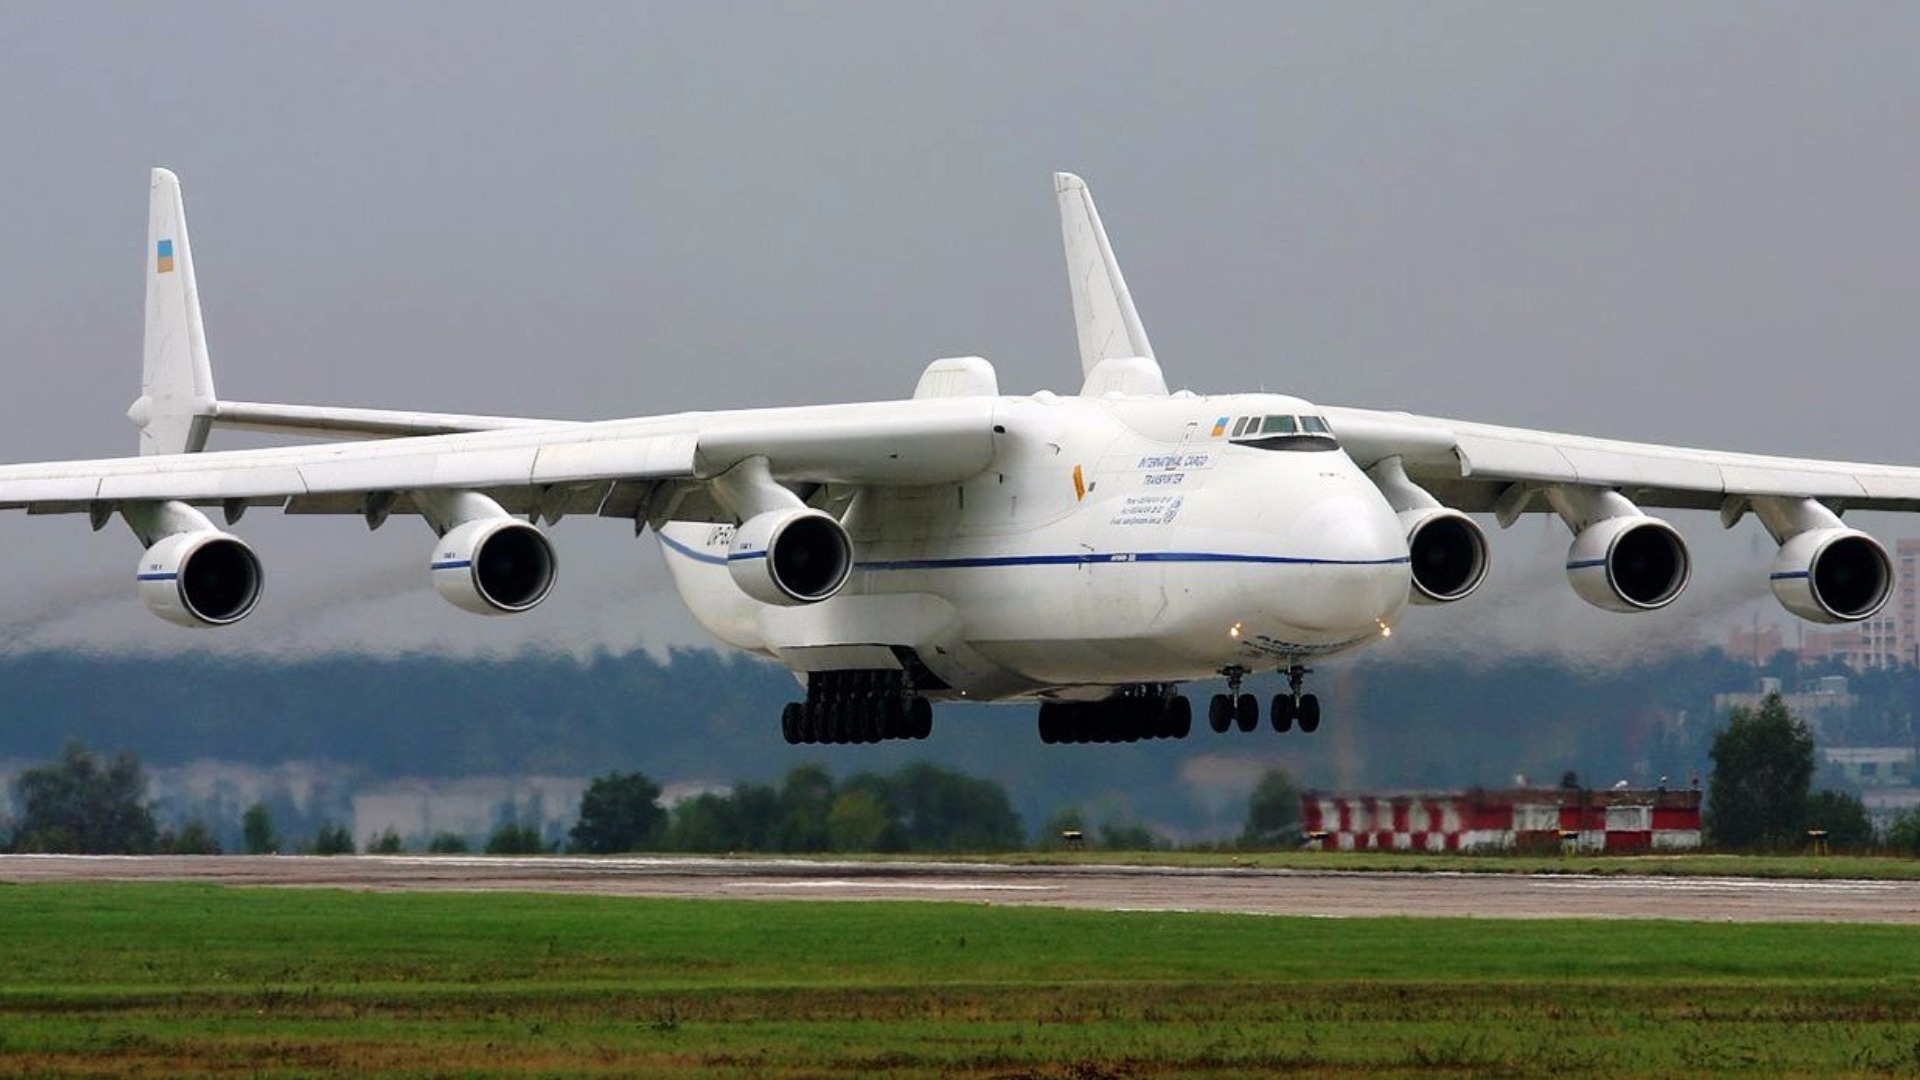 The Largest Plane Ever Built Will Complete a Tough Mission